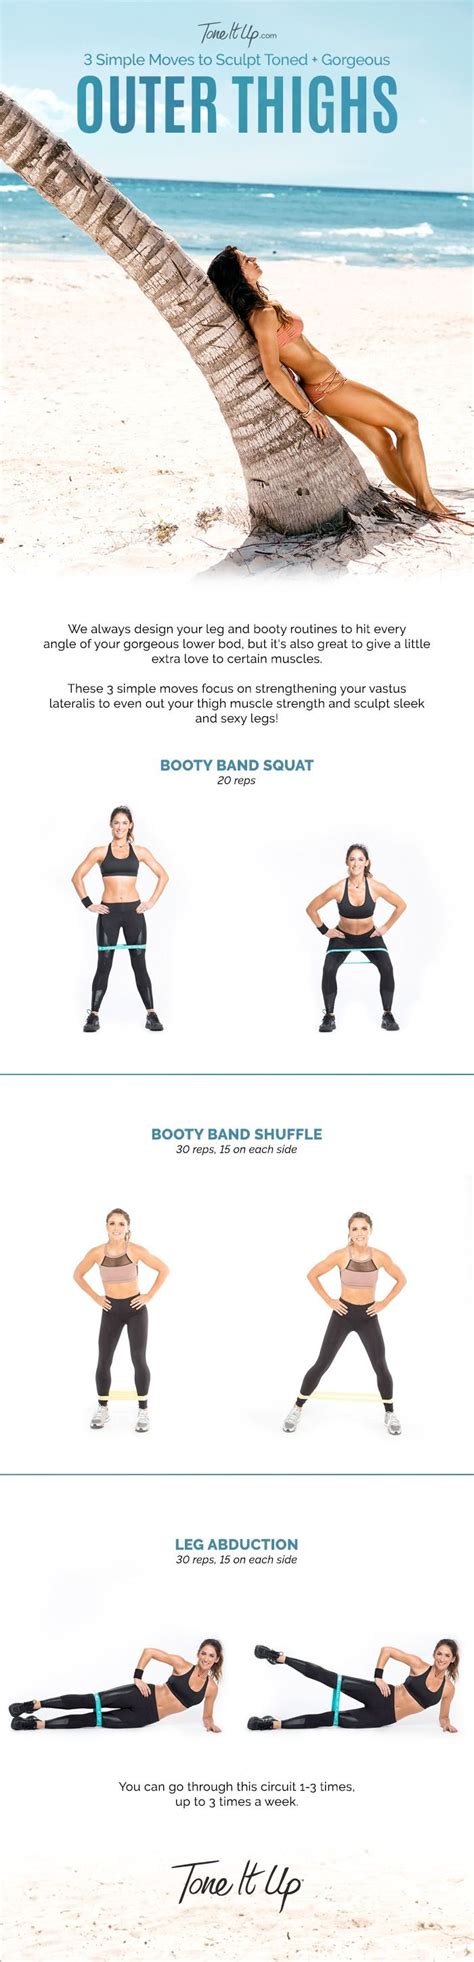 3 Simple Moves To Sculpt Toned And Gorgeous Outer Thighs From Toneitup